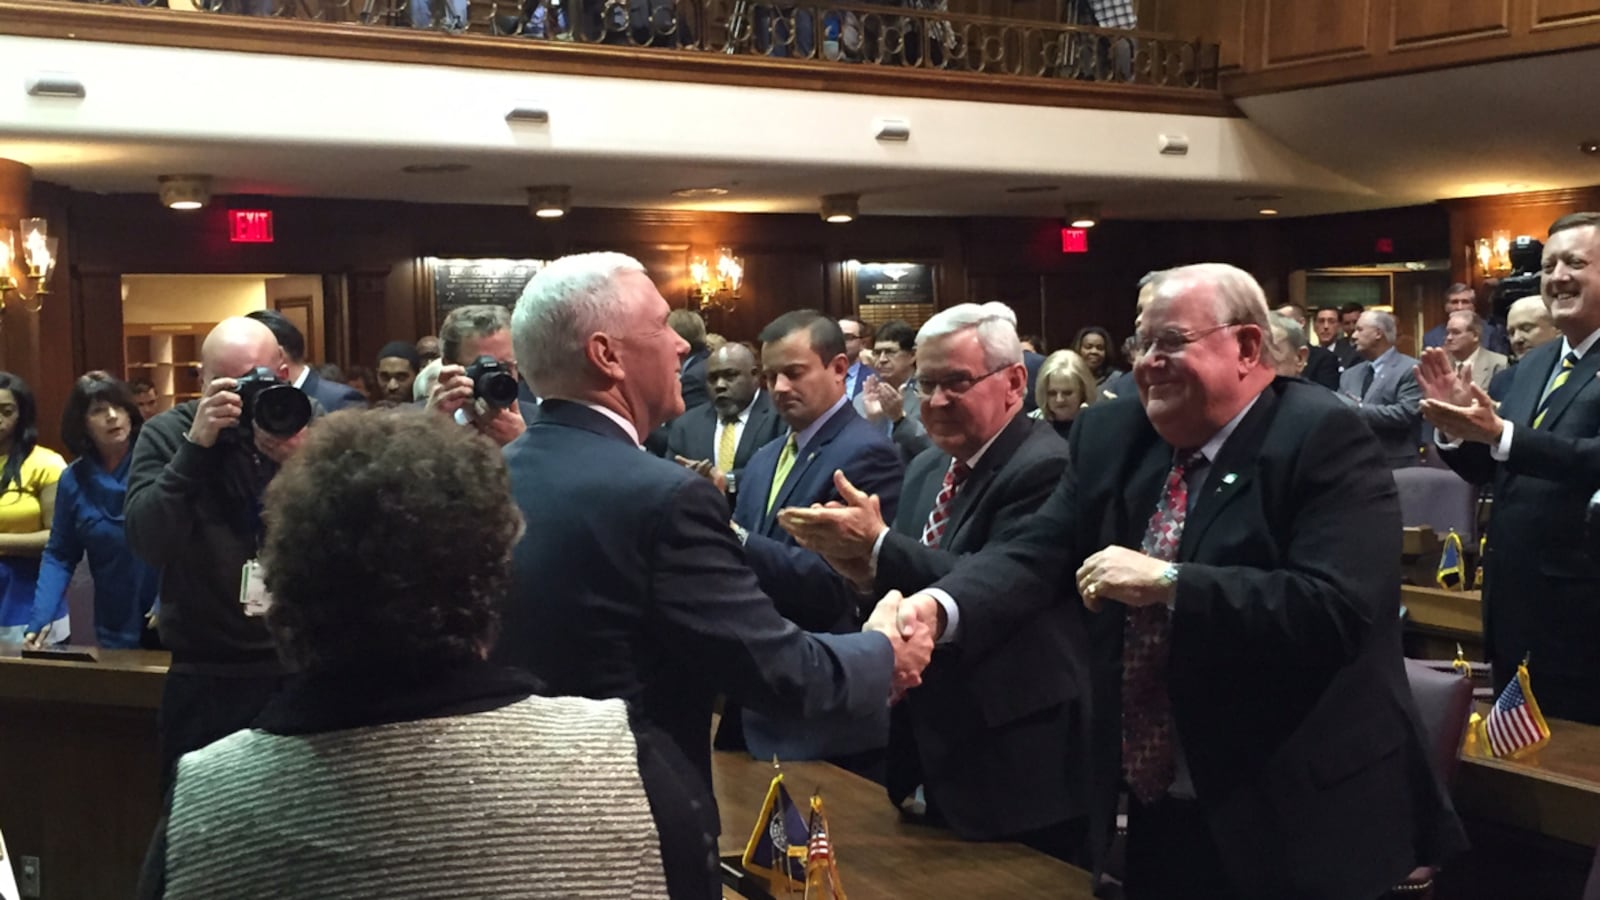 Gov. Mike Pence greets Republican lawmakers after his State of the State address Tuesday night.